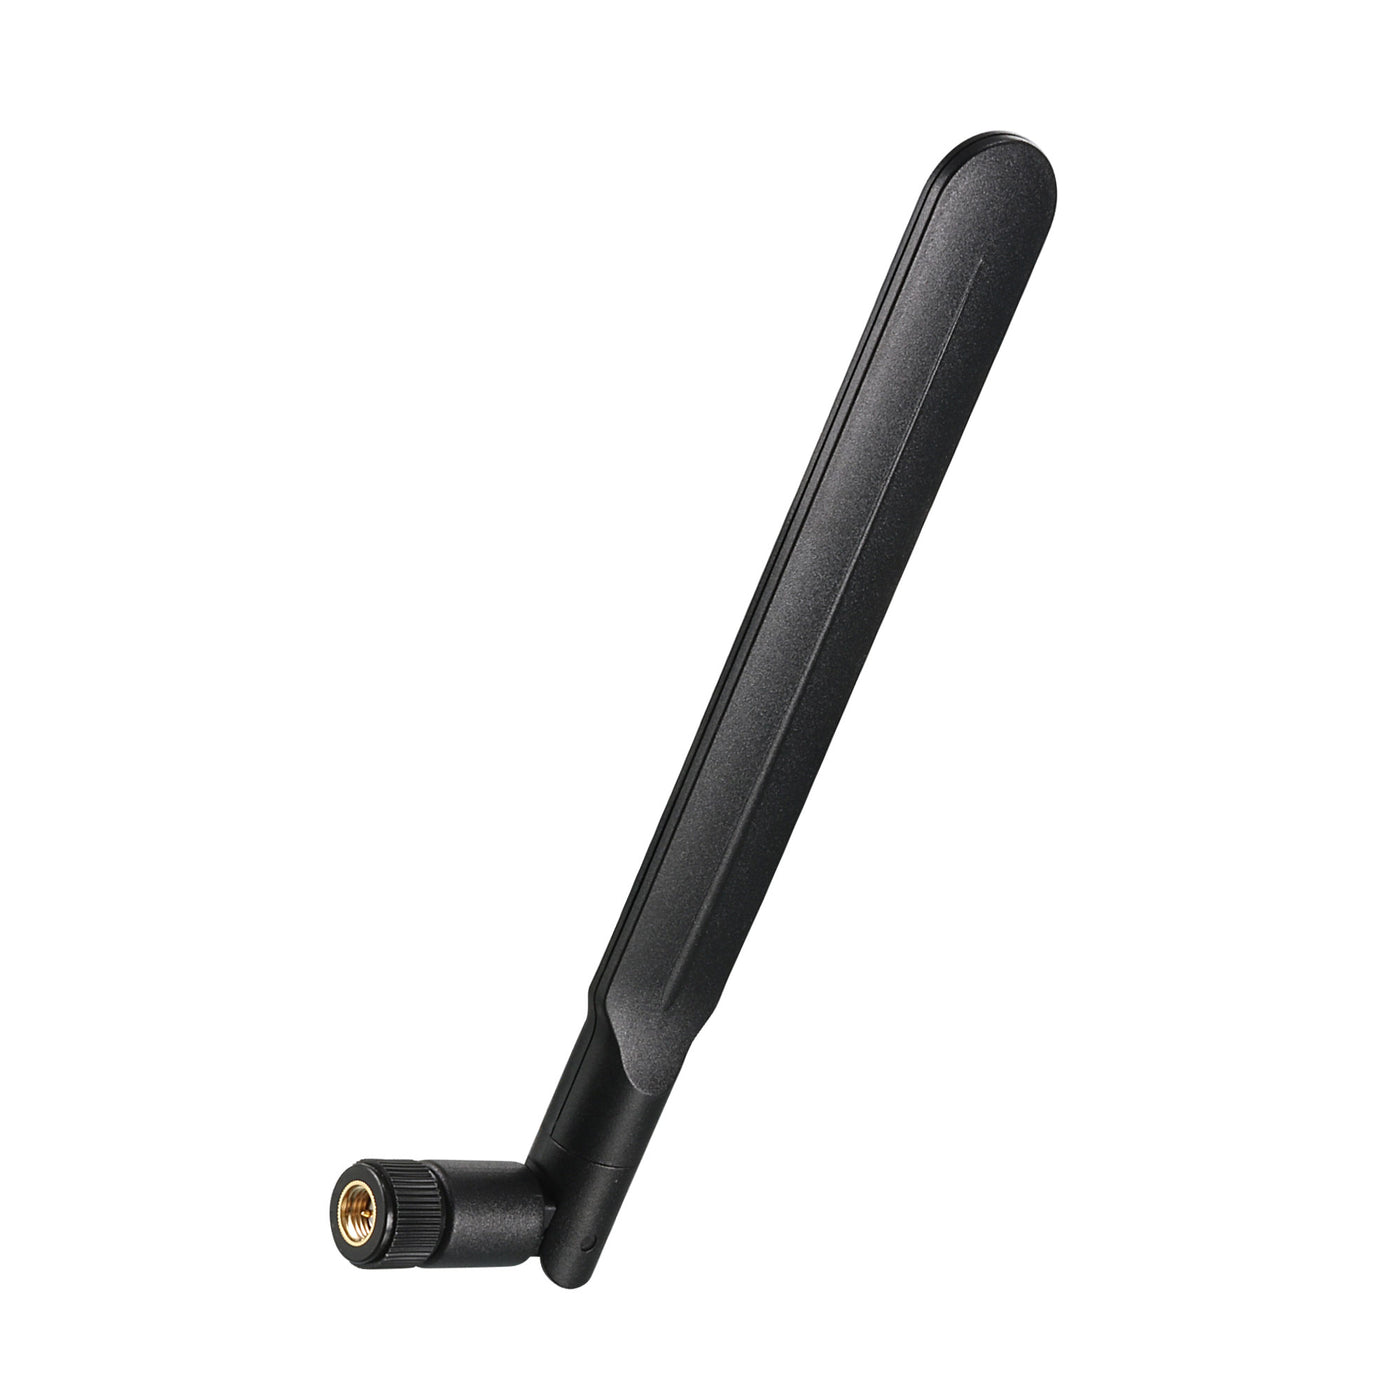 uxcell Uxcell GSM LTE Antenna 3G 4G 9dBi High Gain 780-960/1710-2700MHz SMA Male Connector Direction Foldable Paddle Type